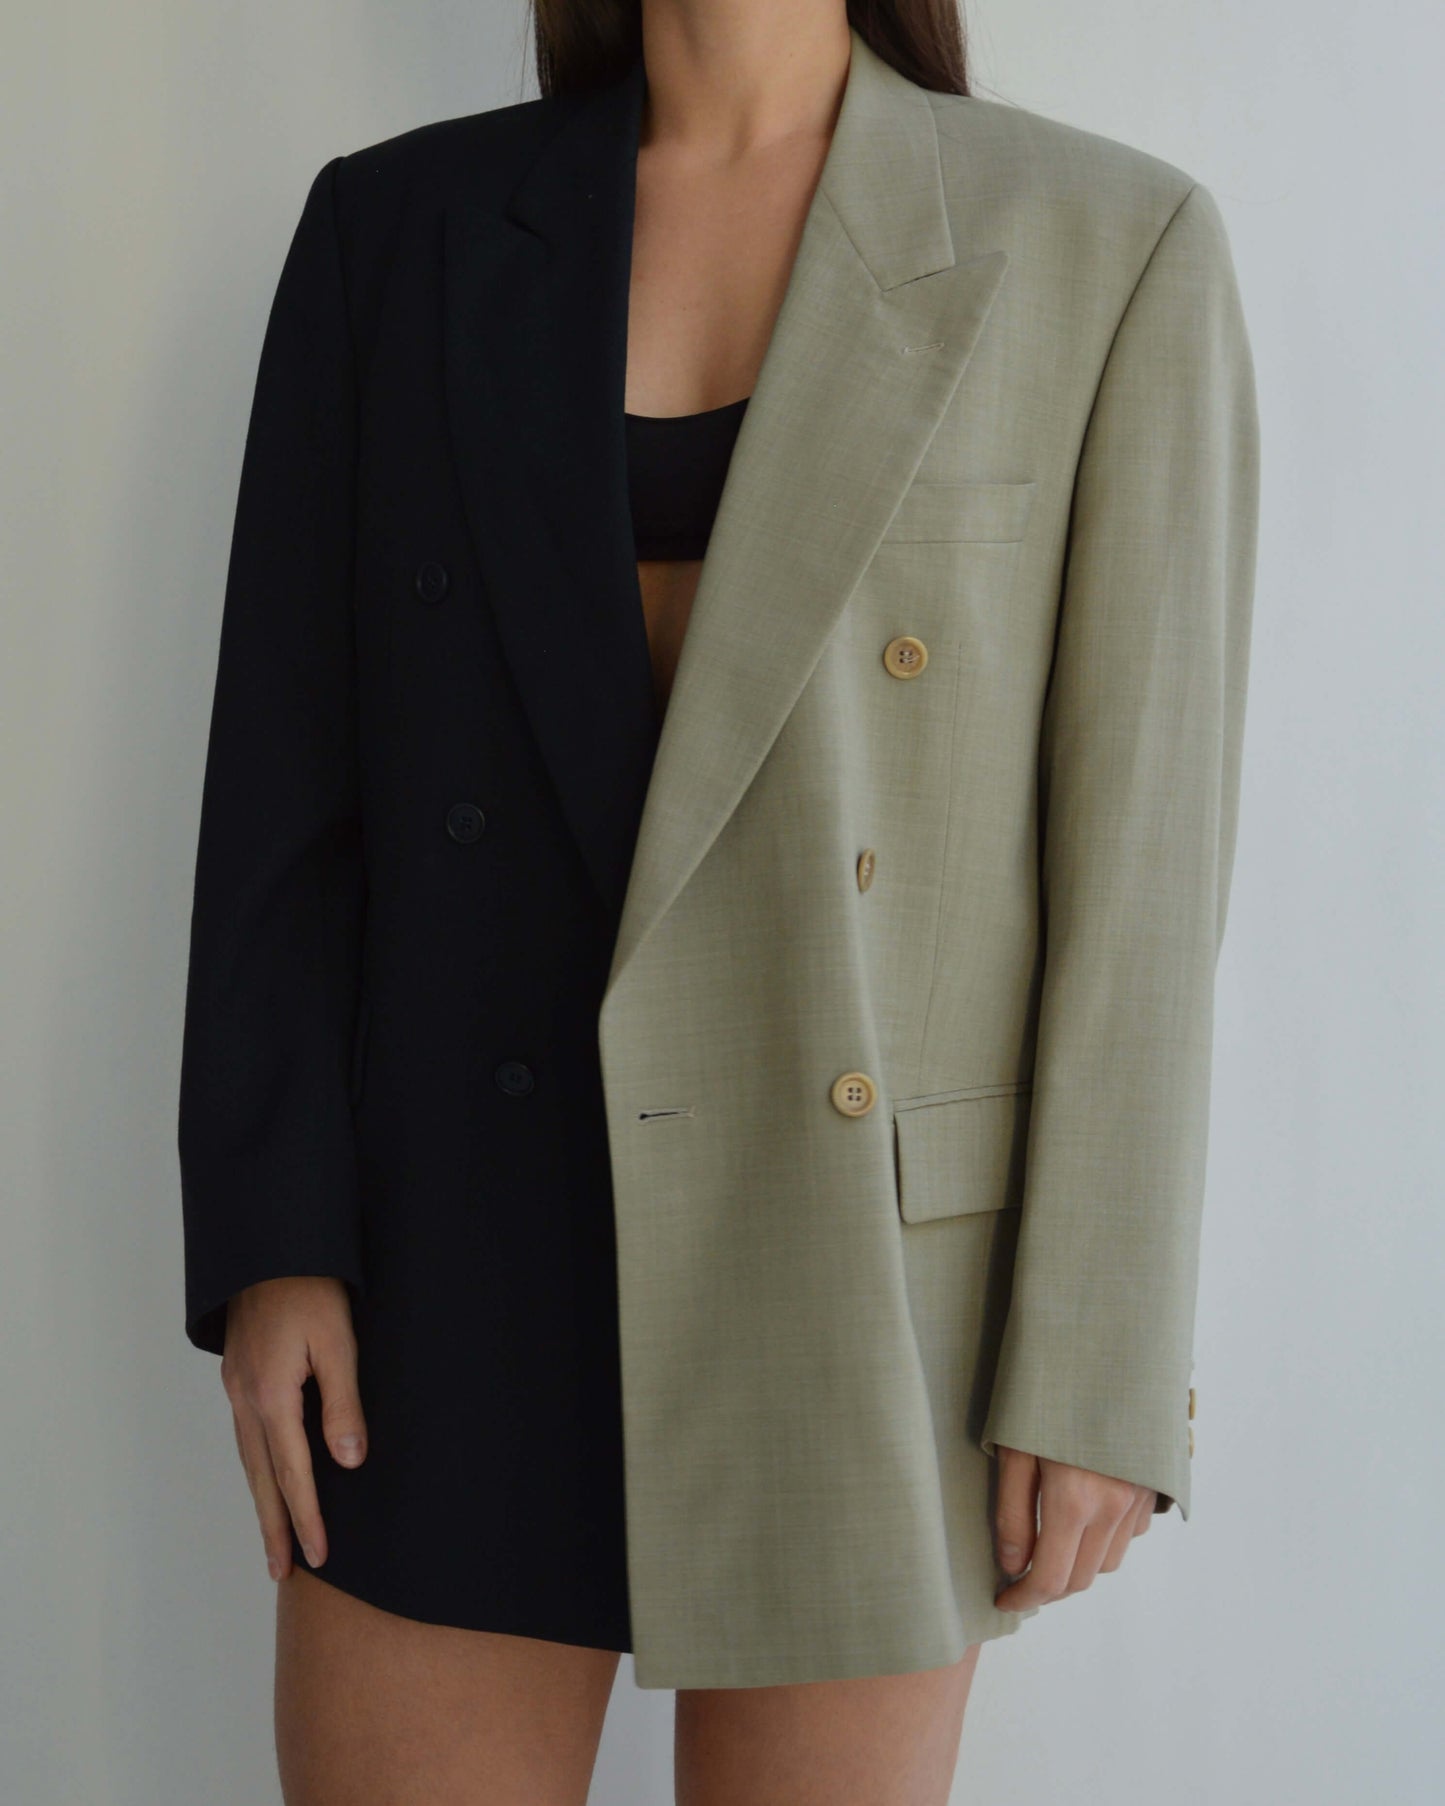 DUO Blazer - Double Breasted Perfect Contrast (S/L)